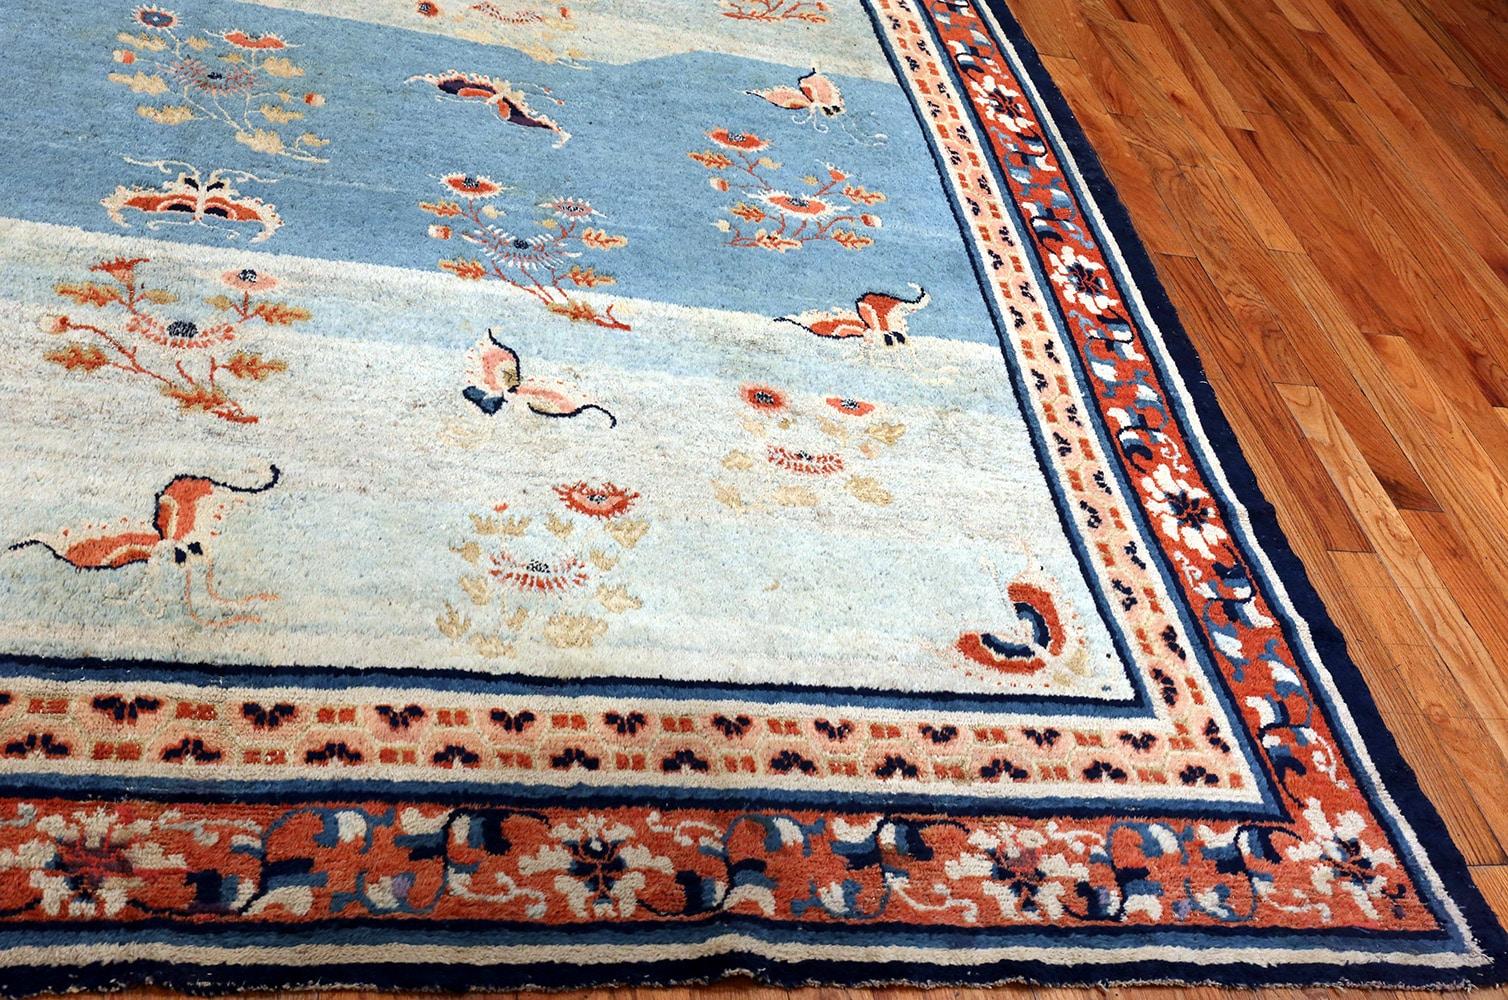 18th Century Kansu Carpet from China. Size: 9 ft 4 in x 14 ft 2 in 1